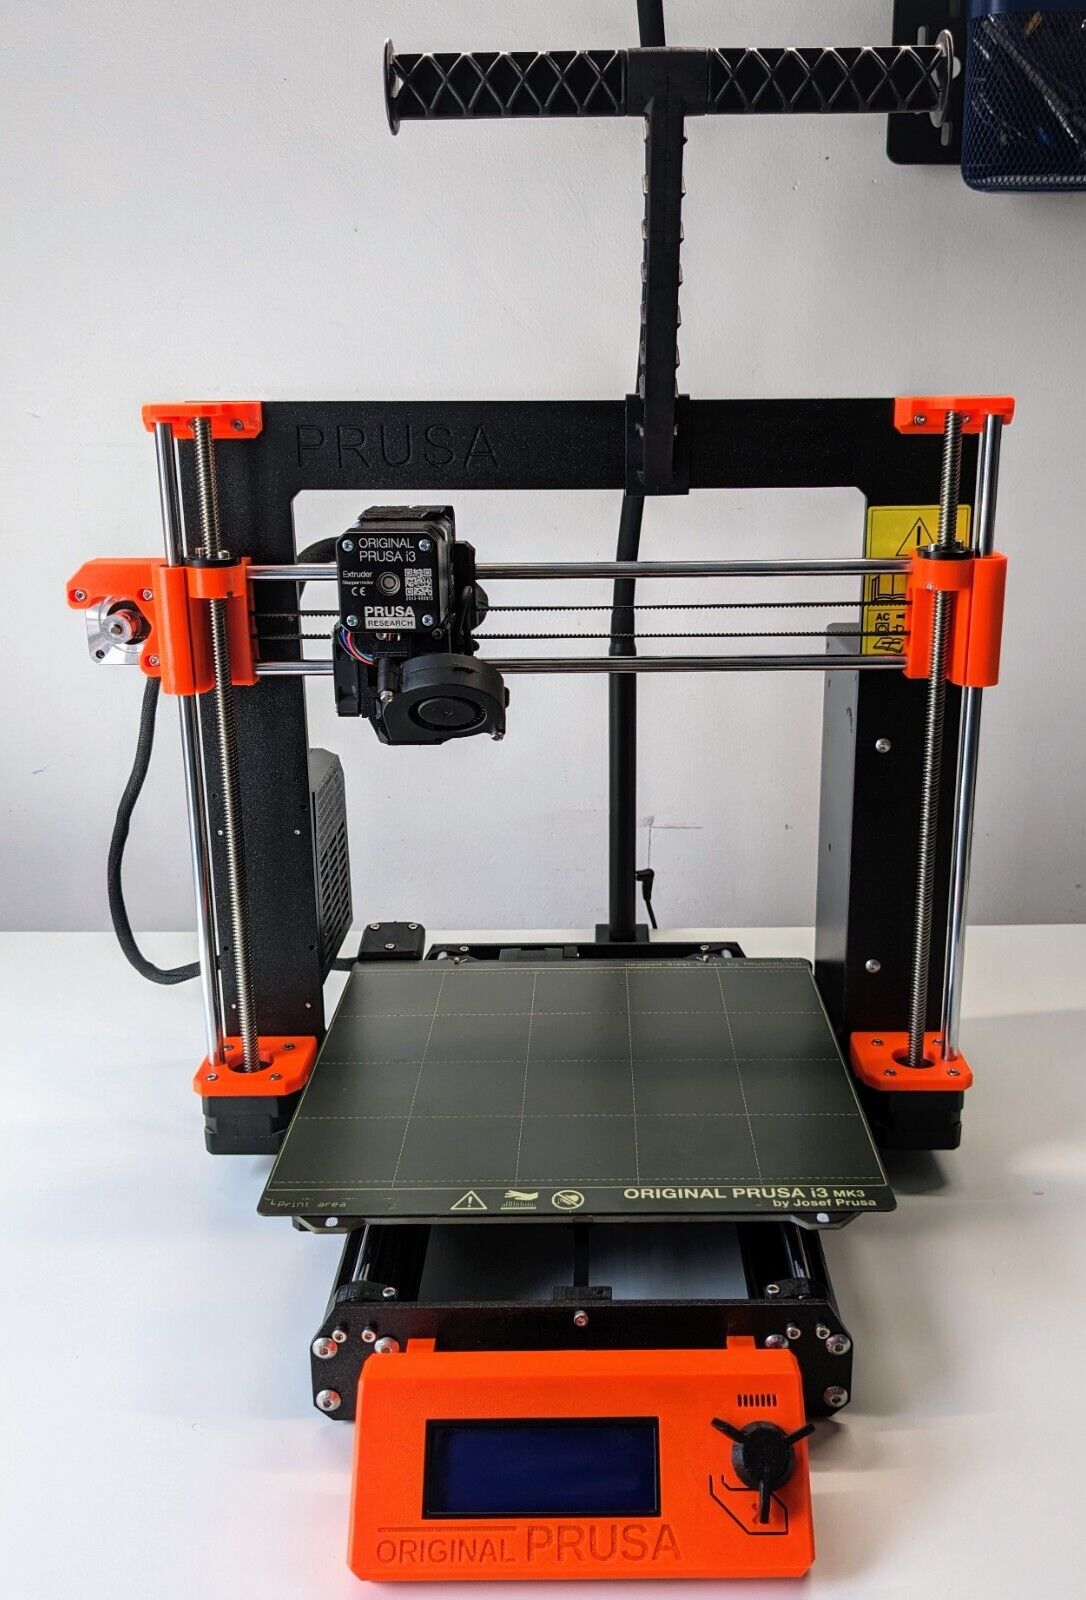 Original Prusa i3 MK3S+ Assembled 3D Printer with Additional Parts and Filament